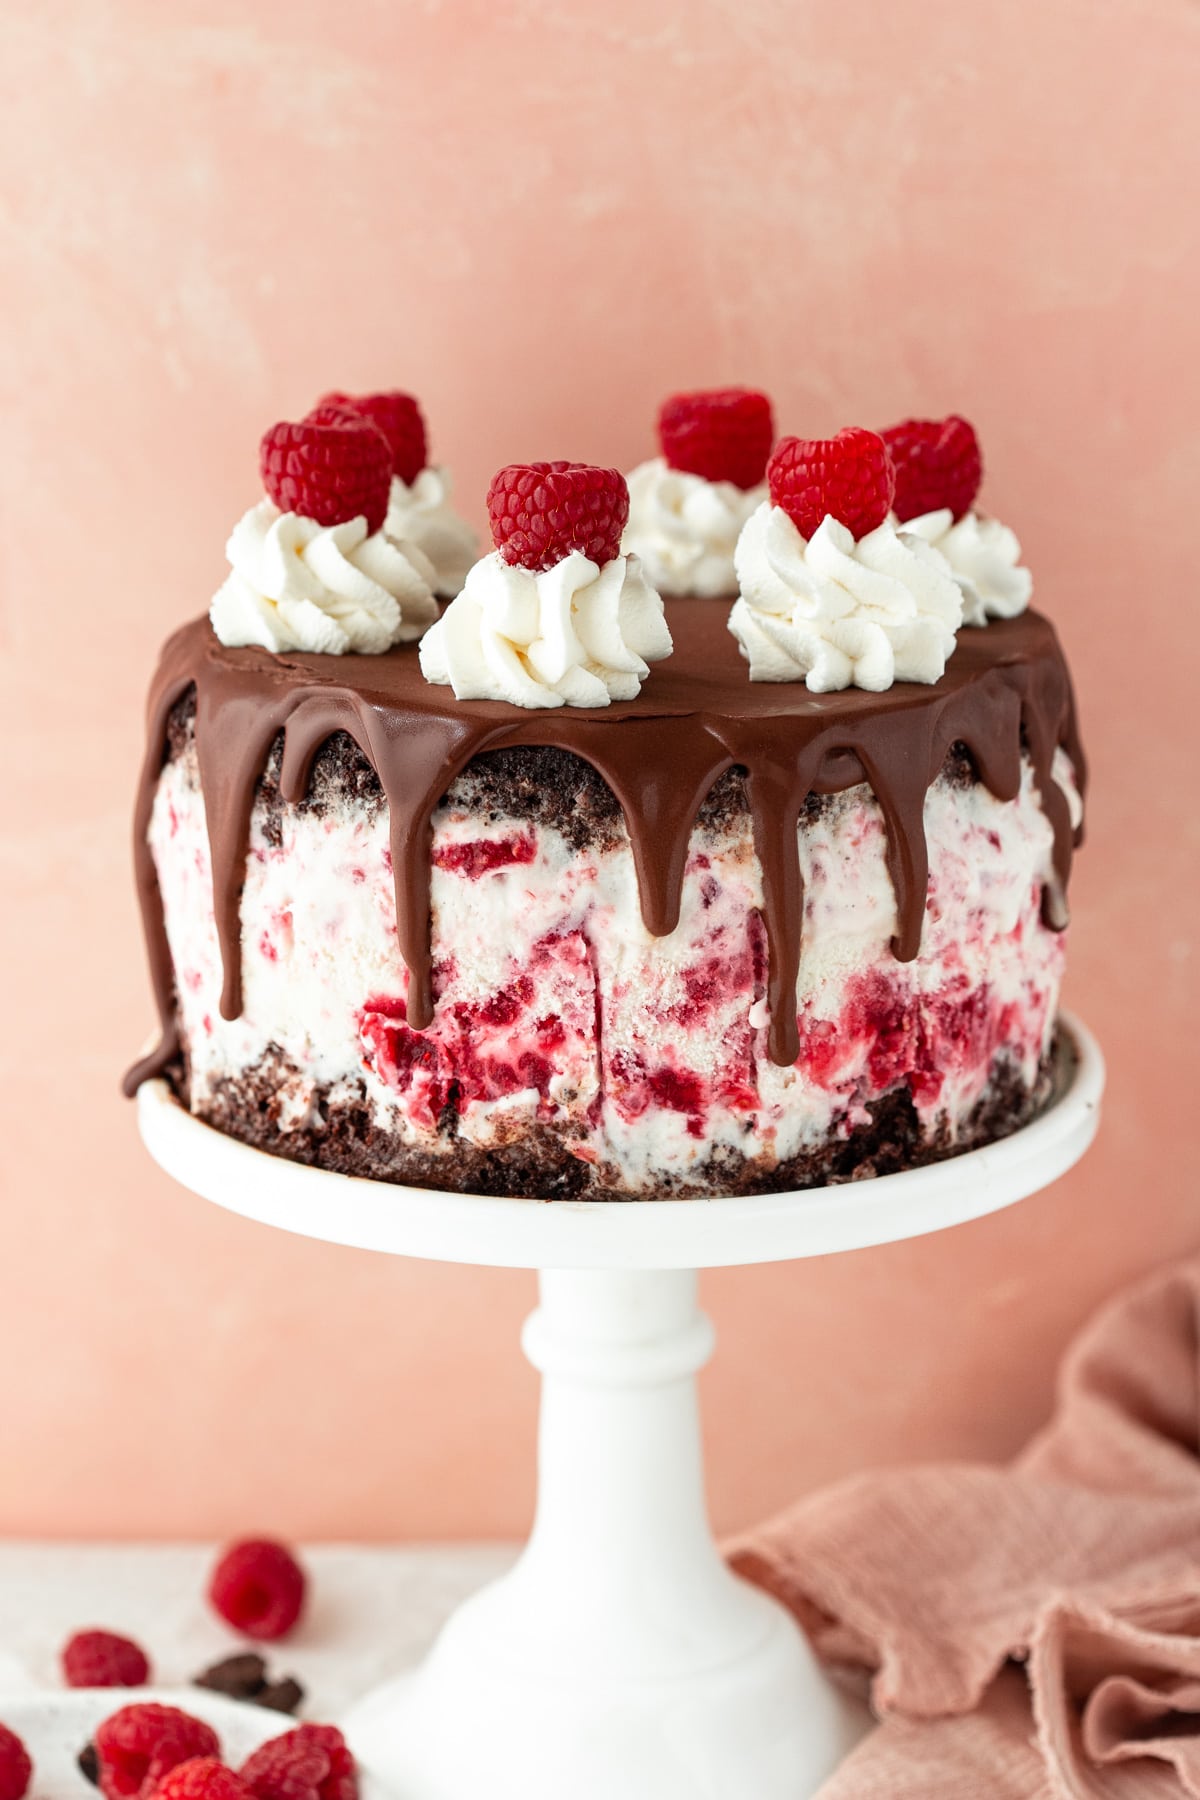 Ice cream cake on a cake stand against a pink backdrop, with raspberries in the foreground.